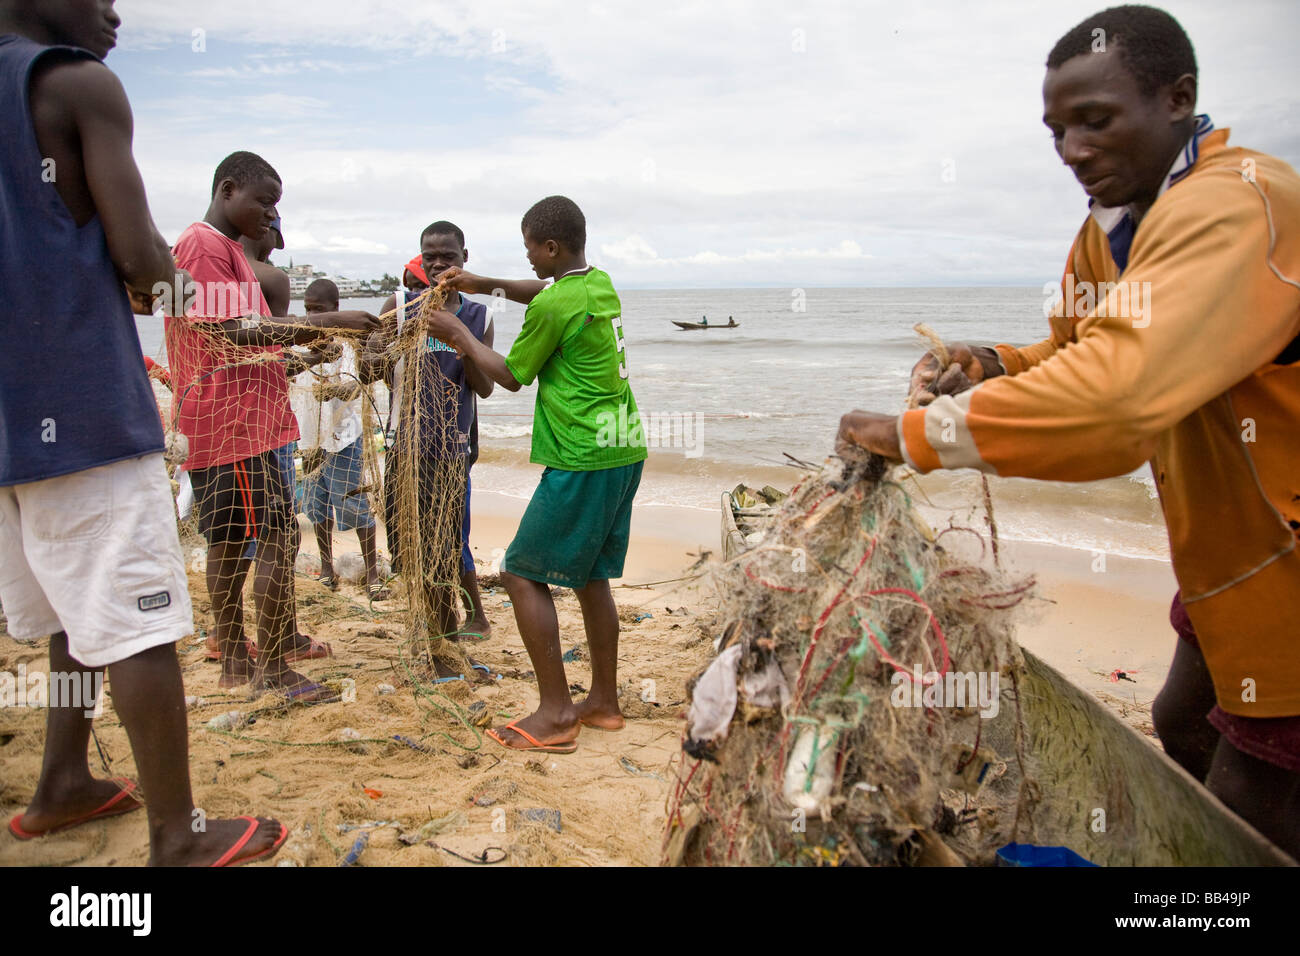 Life in the Monrovian fishing community of West Point in Liberia